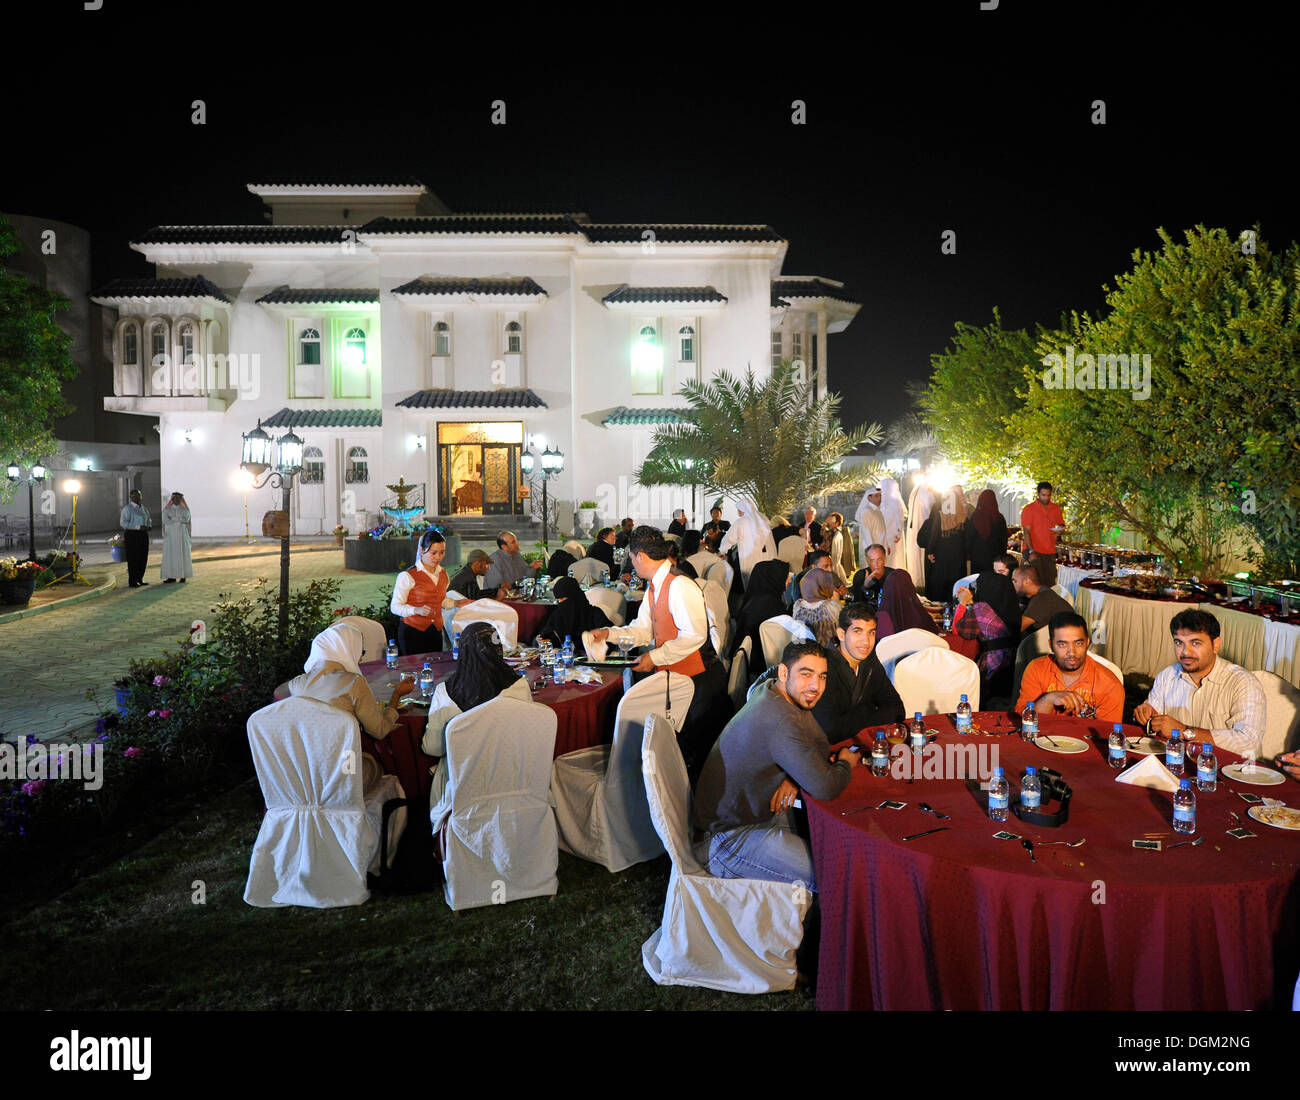 Garden party in a villa, Doha, Emirate of Qatar, Persian Gulf, Middle East, Asia Stock Photo